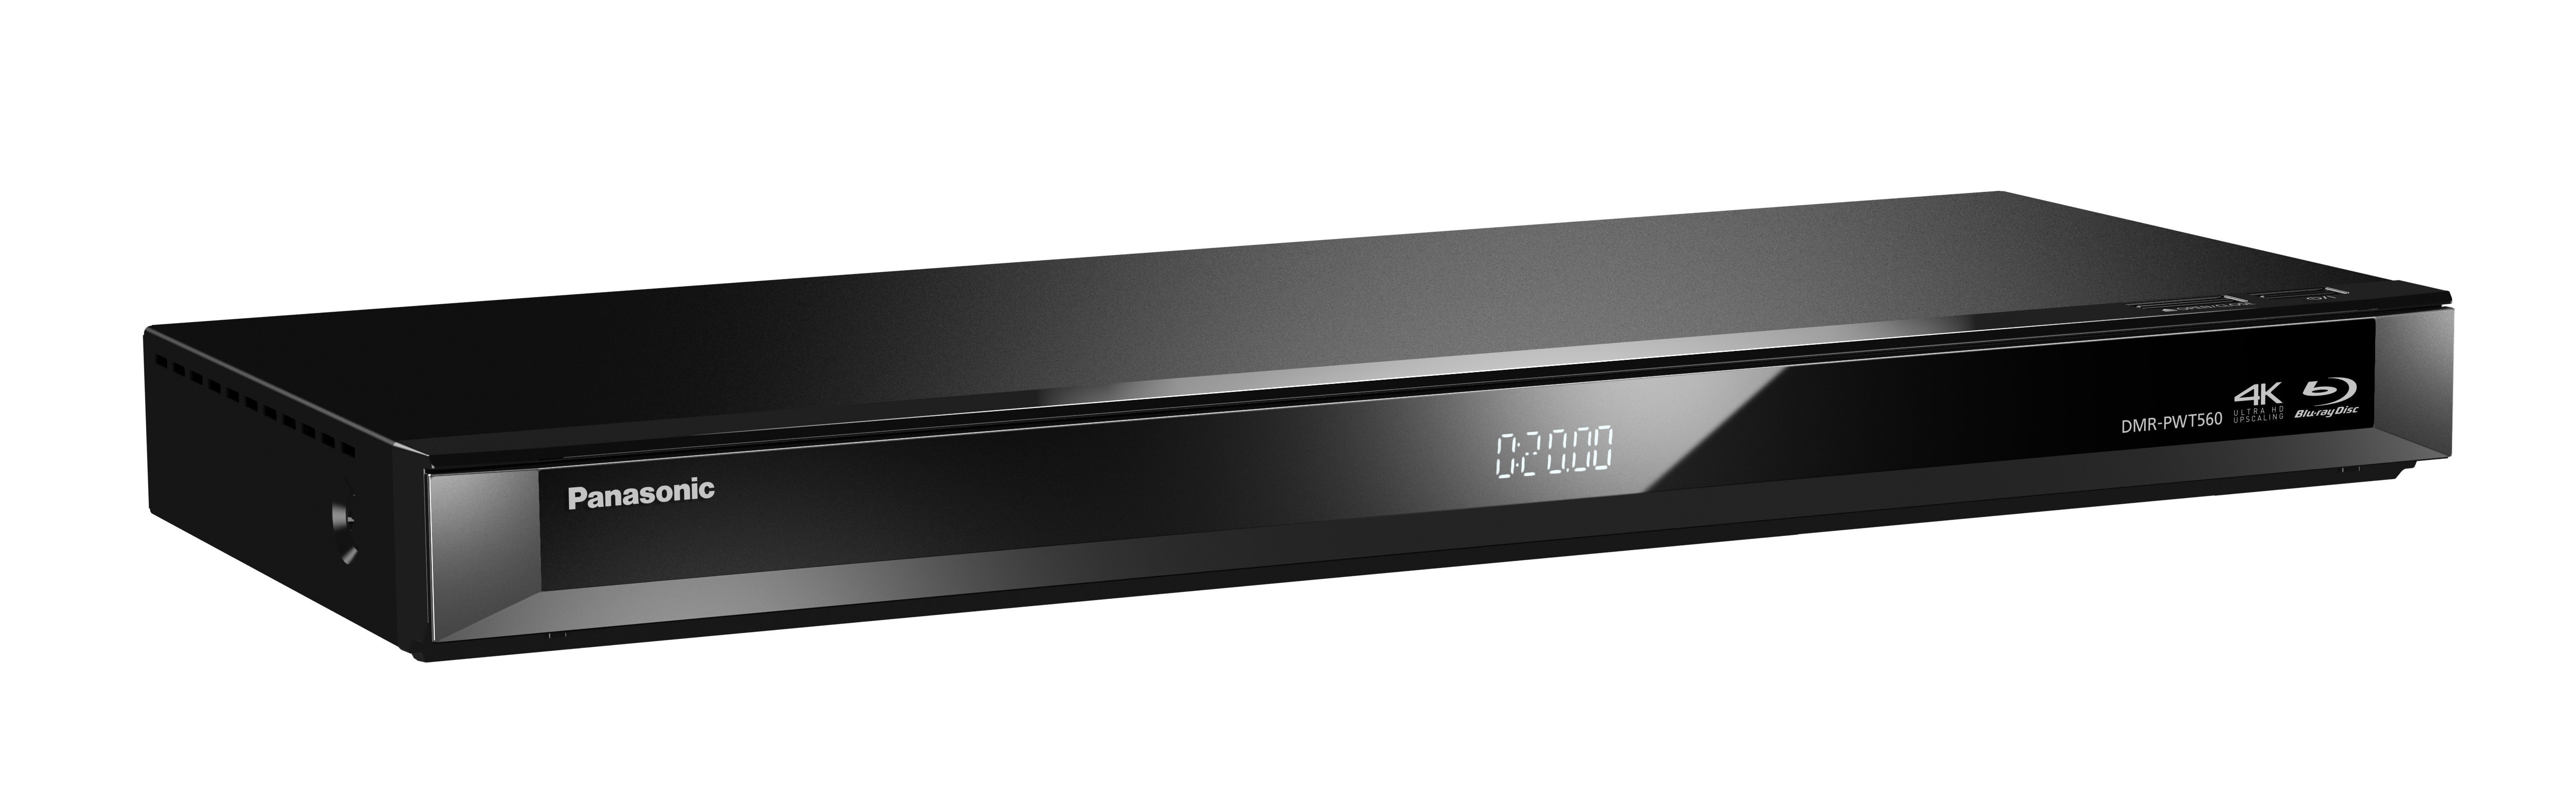 Panasonic DMR-PWT560GN Smart Network 3D Blu-Ray Player and HDD 